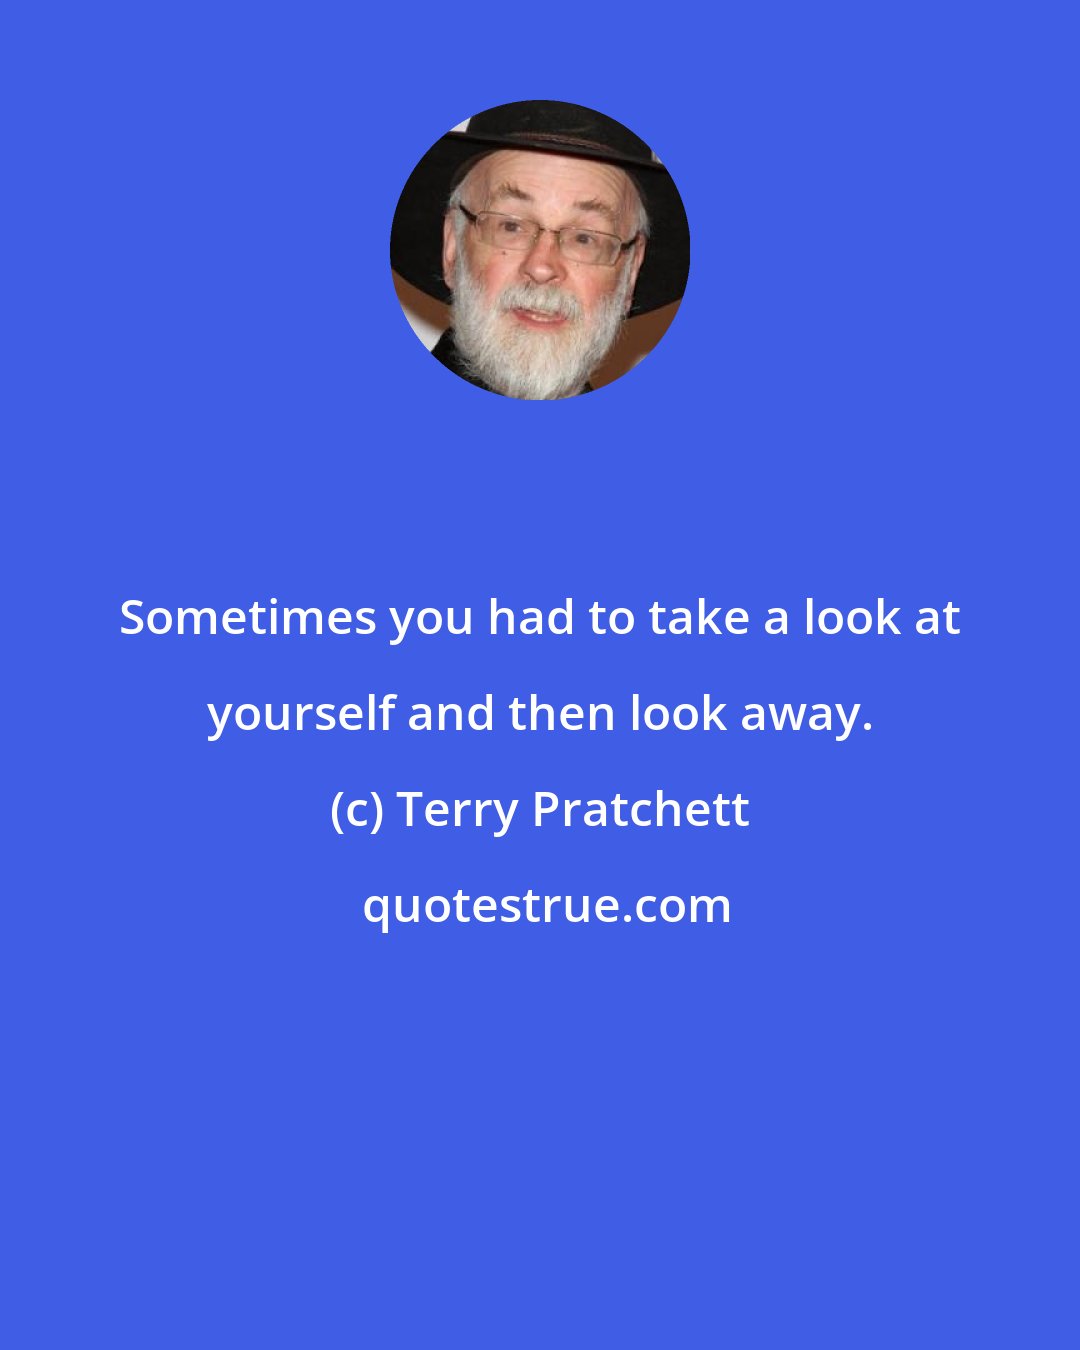 Terry Pratchett: Sometimes you had to take a look at yourself and then look away.